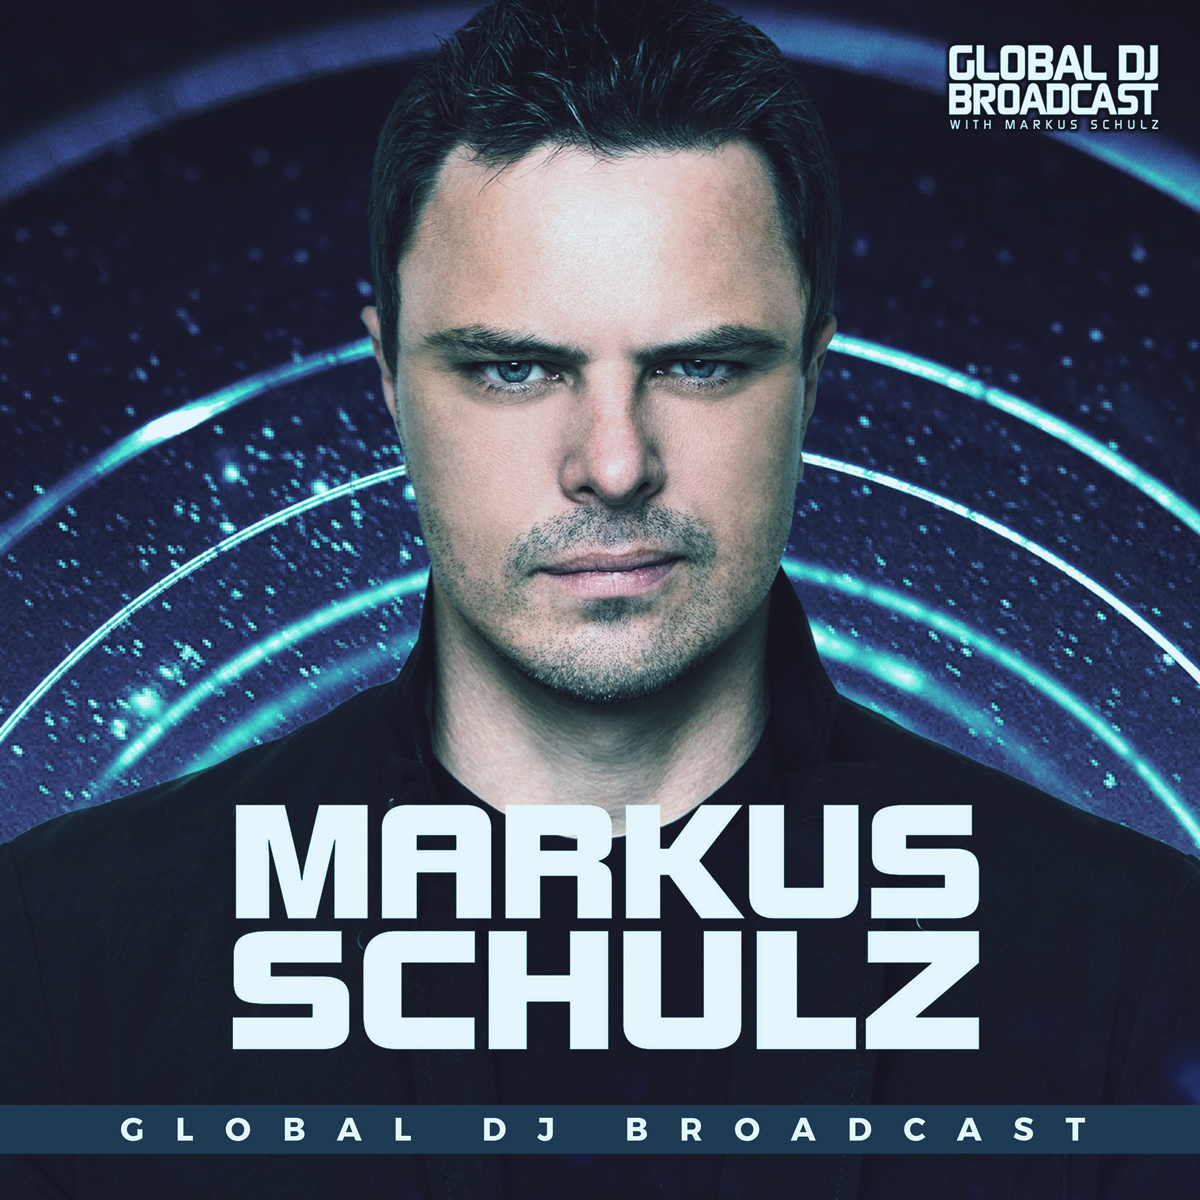 Global DJ Broadcast: ADE Special with Markus Schulz and Ferry Corsten (Oct 17 2017)